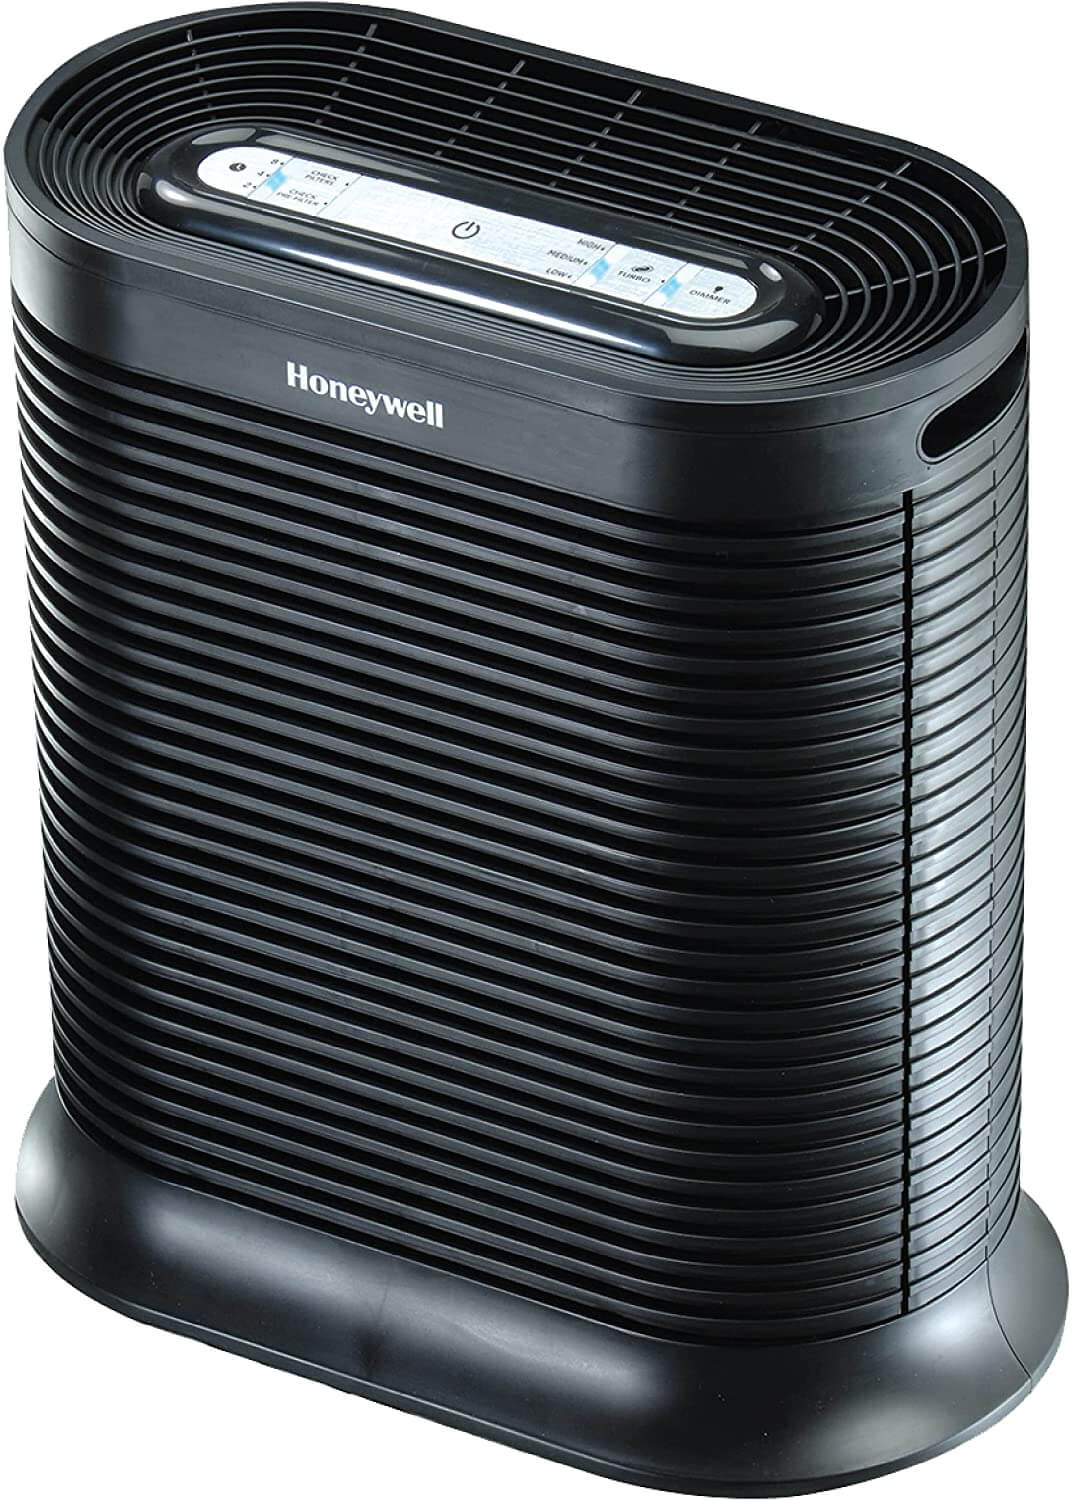 We used to have a HEPA air purifier in the past (like the one shown above), but it wasn't very effective and covered only a single room.